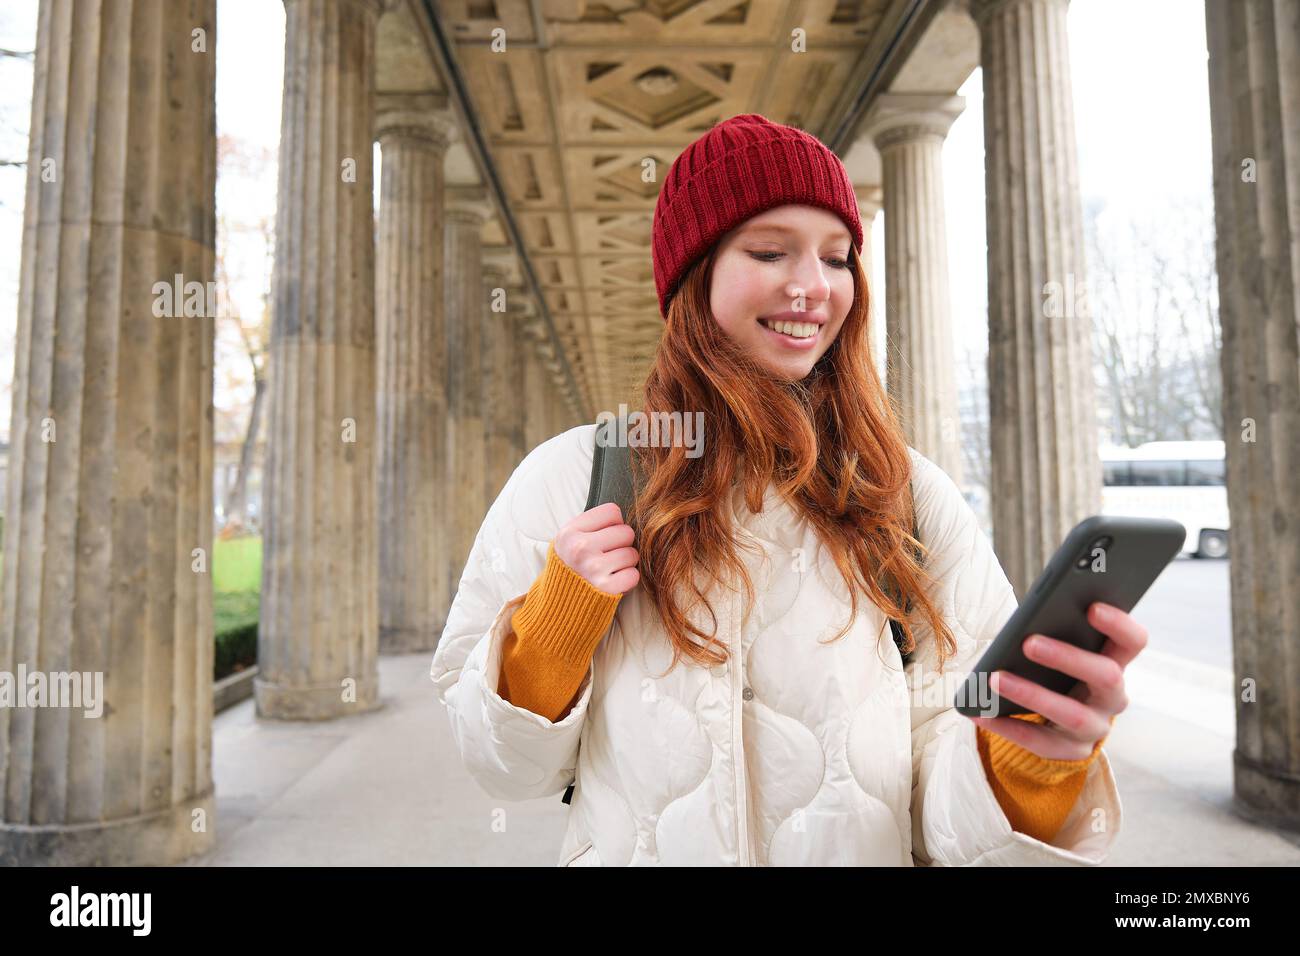 Mobile broadband and people. Smiling redhead 20s girl with backpack, uses smartphone on street, holds mobile phone and looks at application. Stock Photo